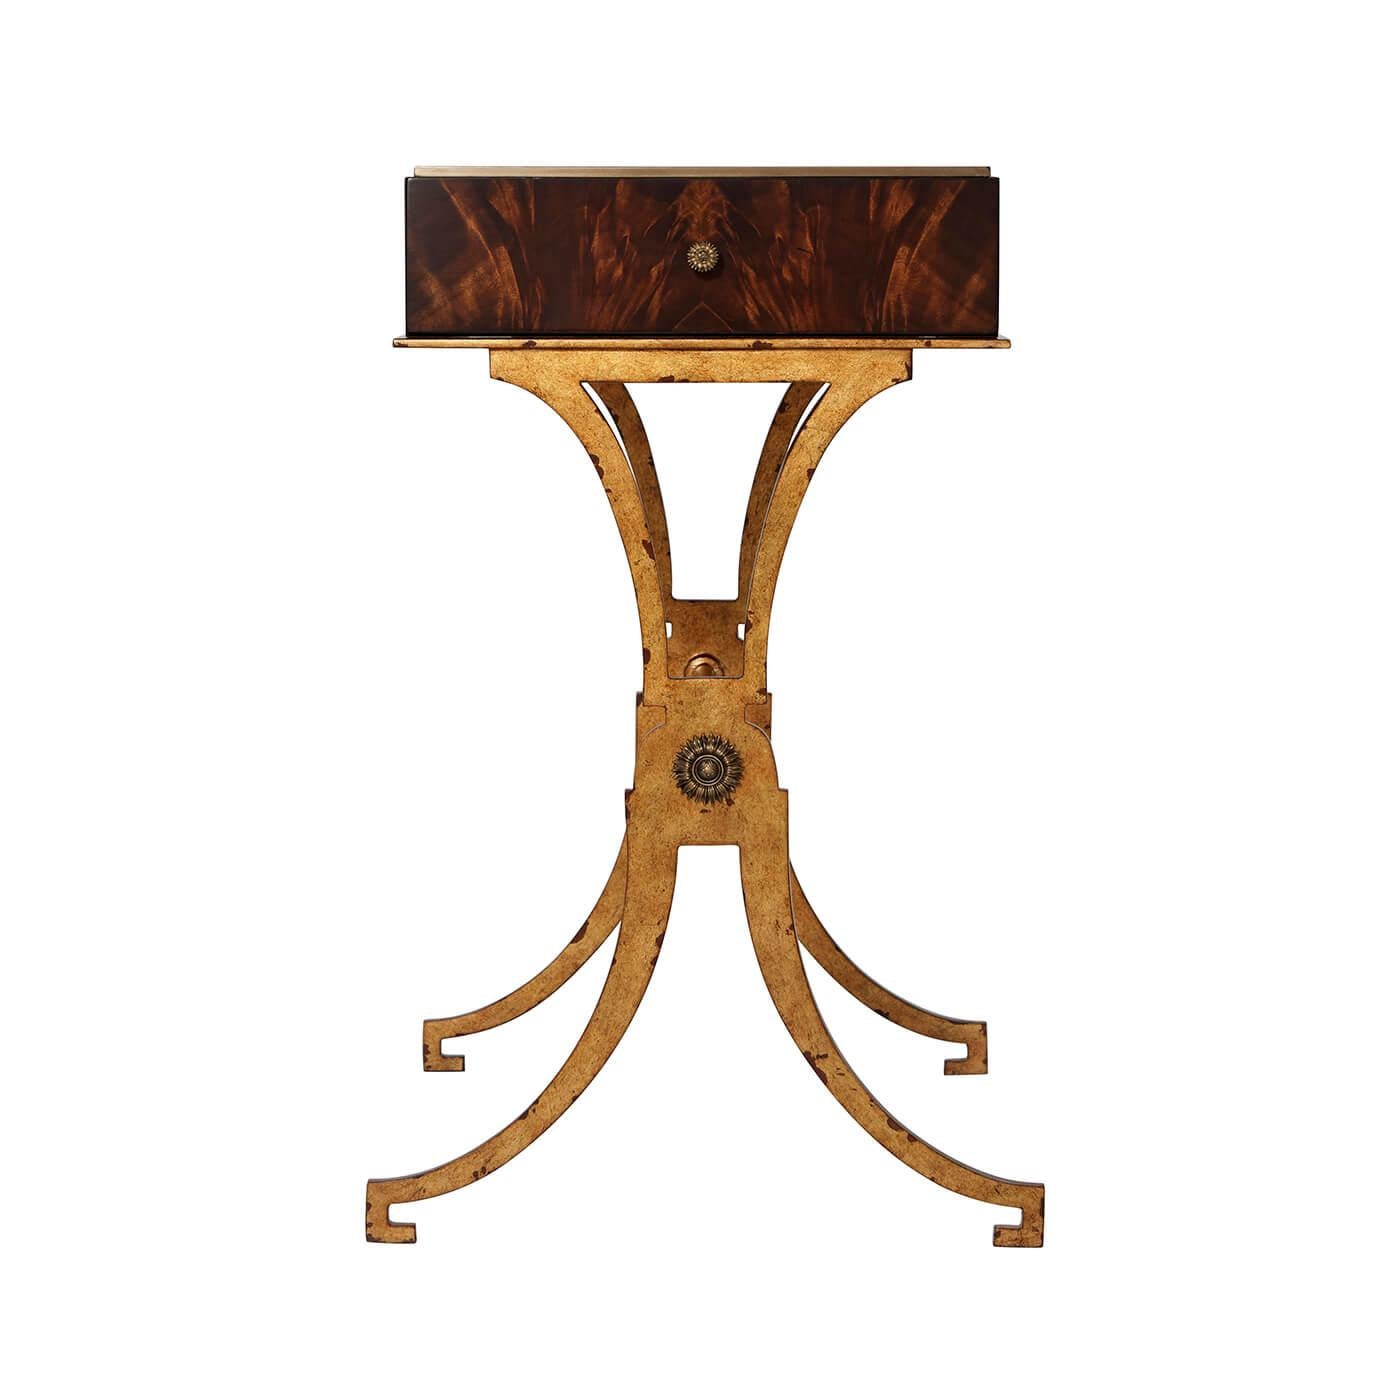 A modern flame mahogany veneered lamp table, the rectangular top with an inset brass edge, with two opposing end drawers, on antiqued gilt iron x end supports joined by a stretcher.

Dimensions: 23.5